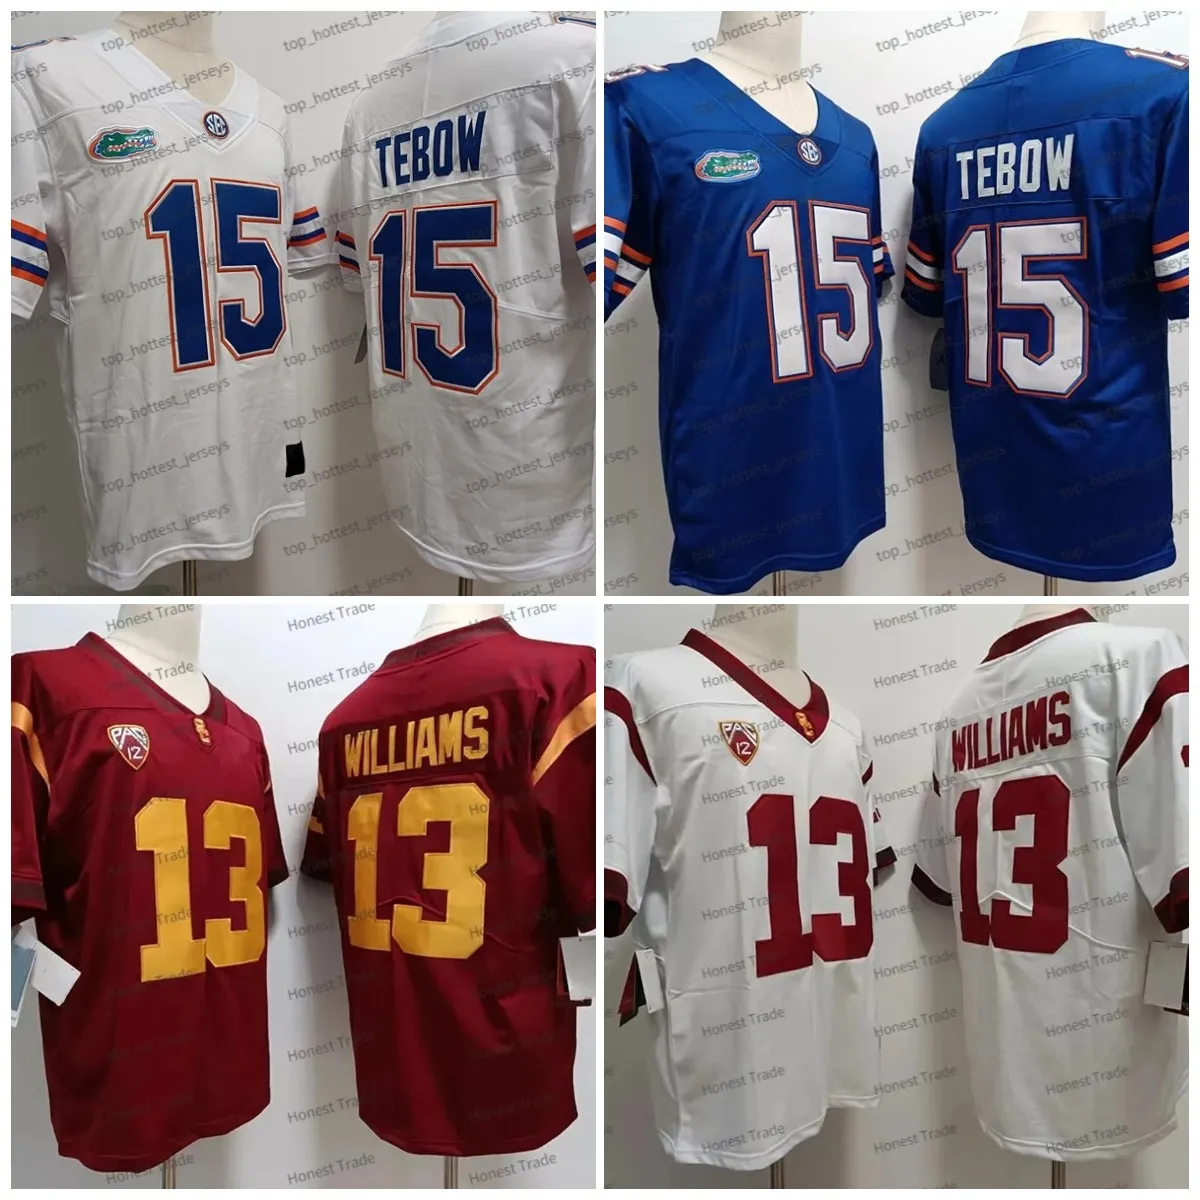 Florida Gators 15 Tim Tebow Football Jersey USC Trojans 13 Caleb Williams White Red Blue Herr College Jersey Stitched